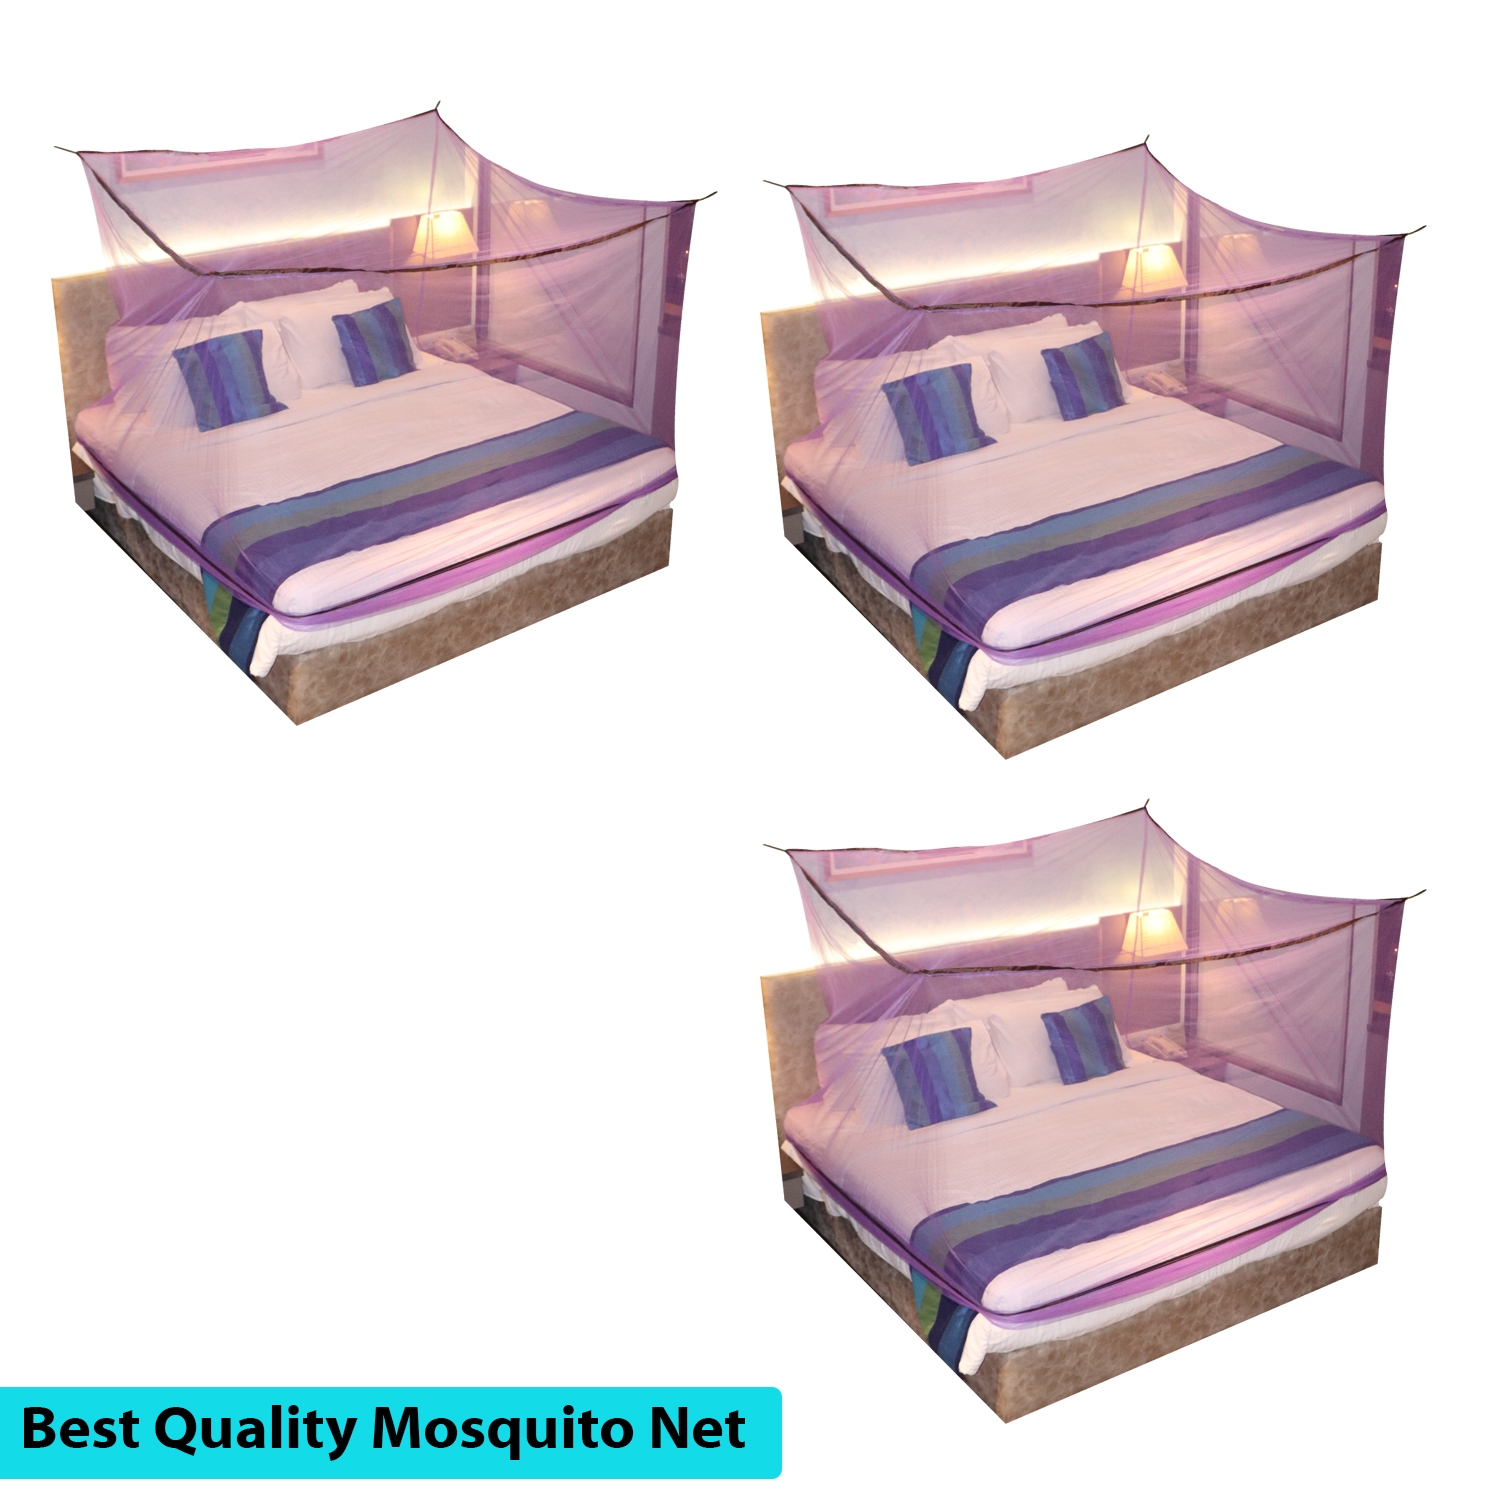 SILVER SHINE | Mosquito Net for Double Bed, King-Size, Square Hanging Foldable Polyester Net Purple And Brown Pack of 3